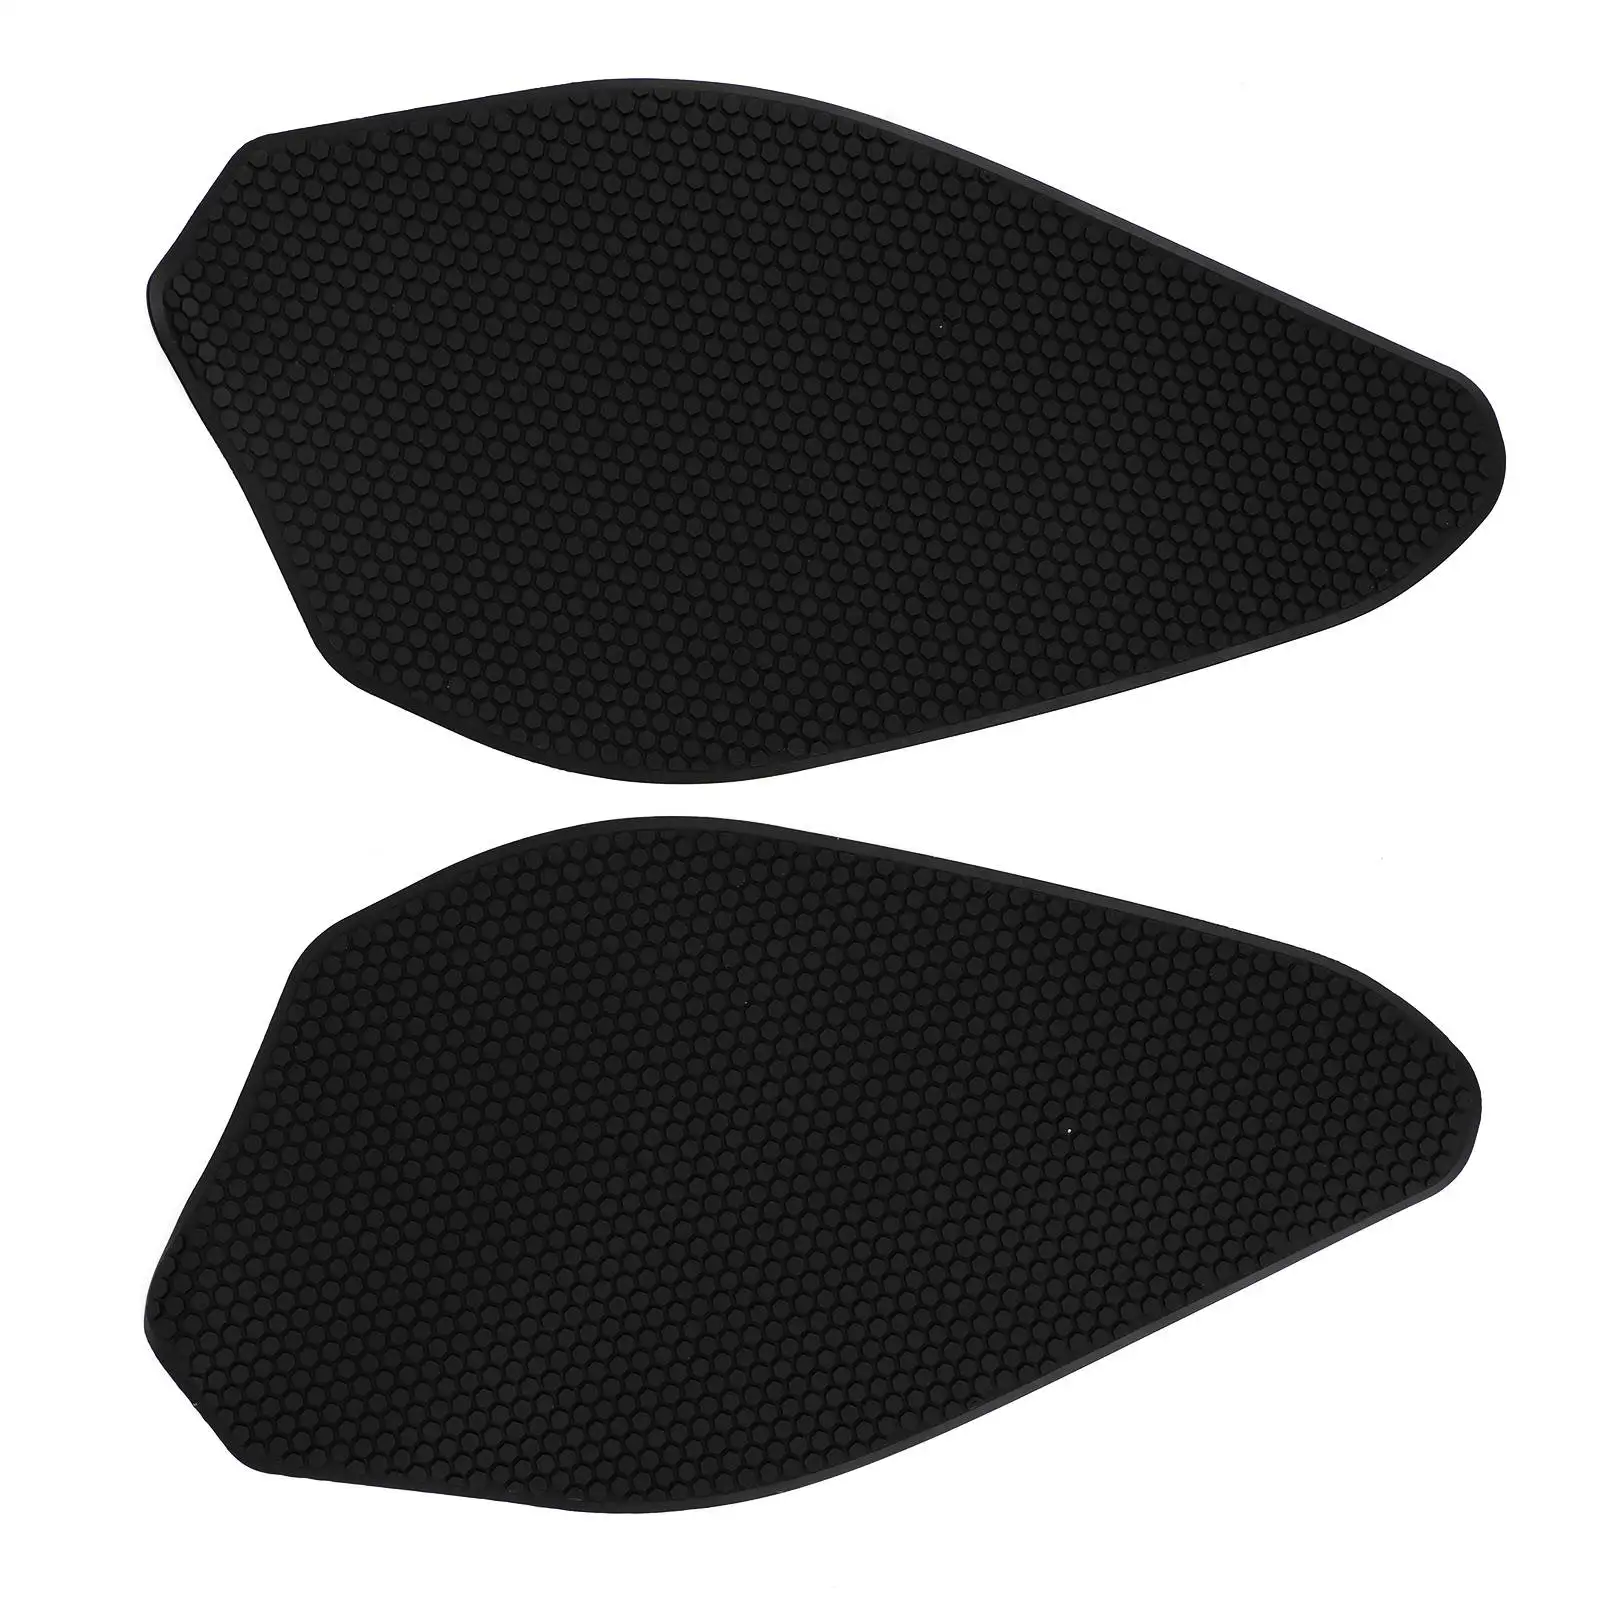 areyourshop 2x side tank traction grips pads fit for kawasaki z1000sx abs 2011 2019 motorcycle accessories parts Areyourshop 2x Side Tank Traction Grips Pads Fit for Yamaha YZF-R3 YZF R3 2019-2020 Motorcycle Accessories Parts